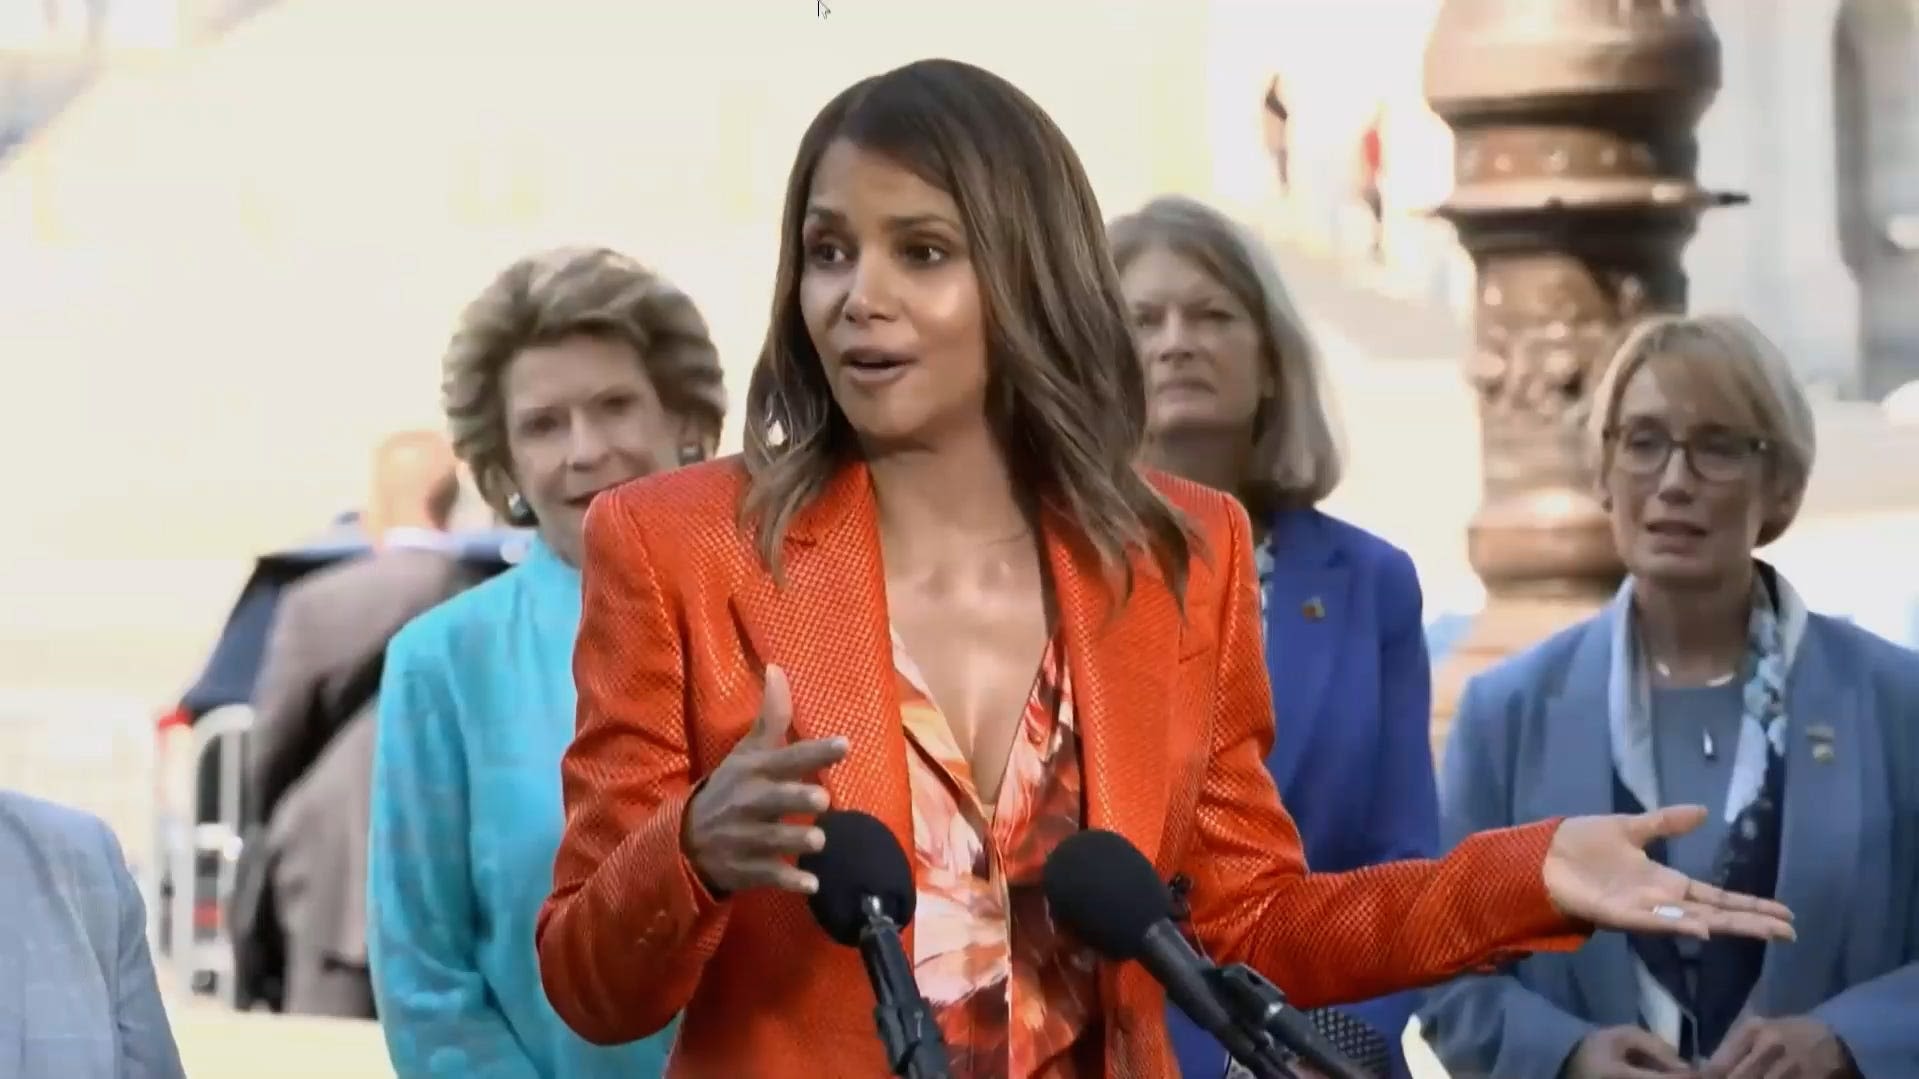 'I'm in menopause, okay?' Halle Berry backs bill to bring more services to women's health